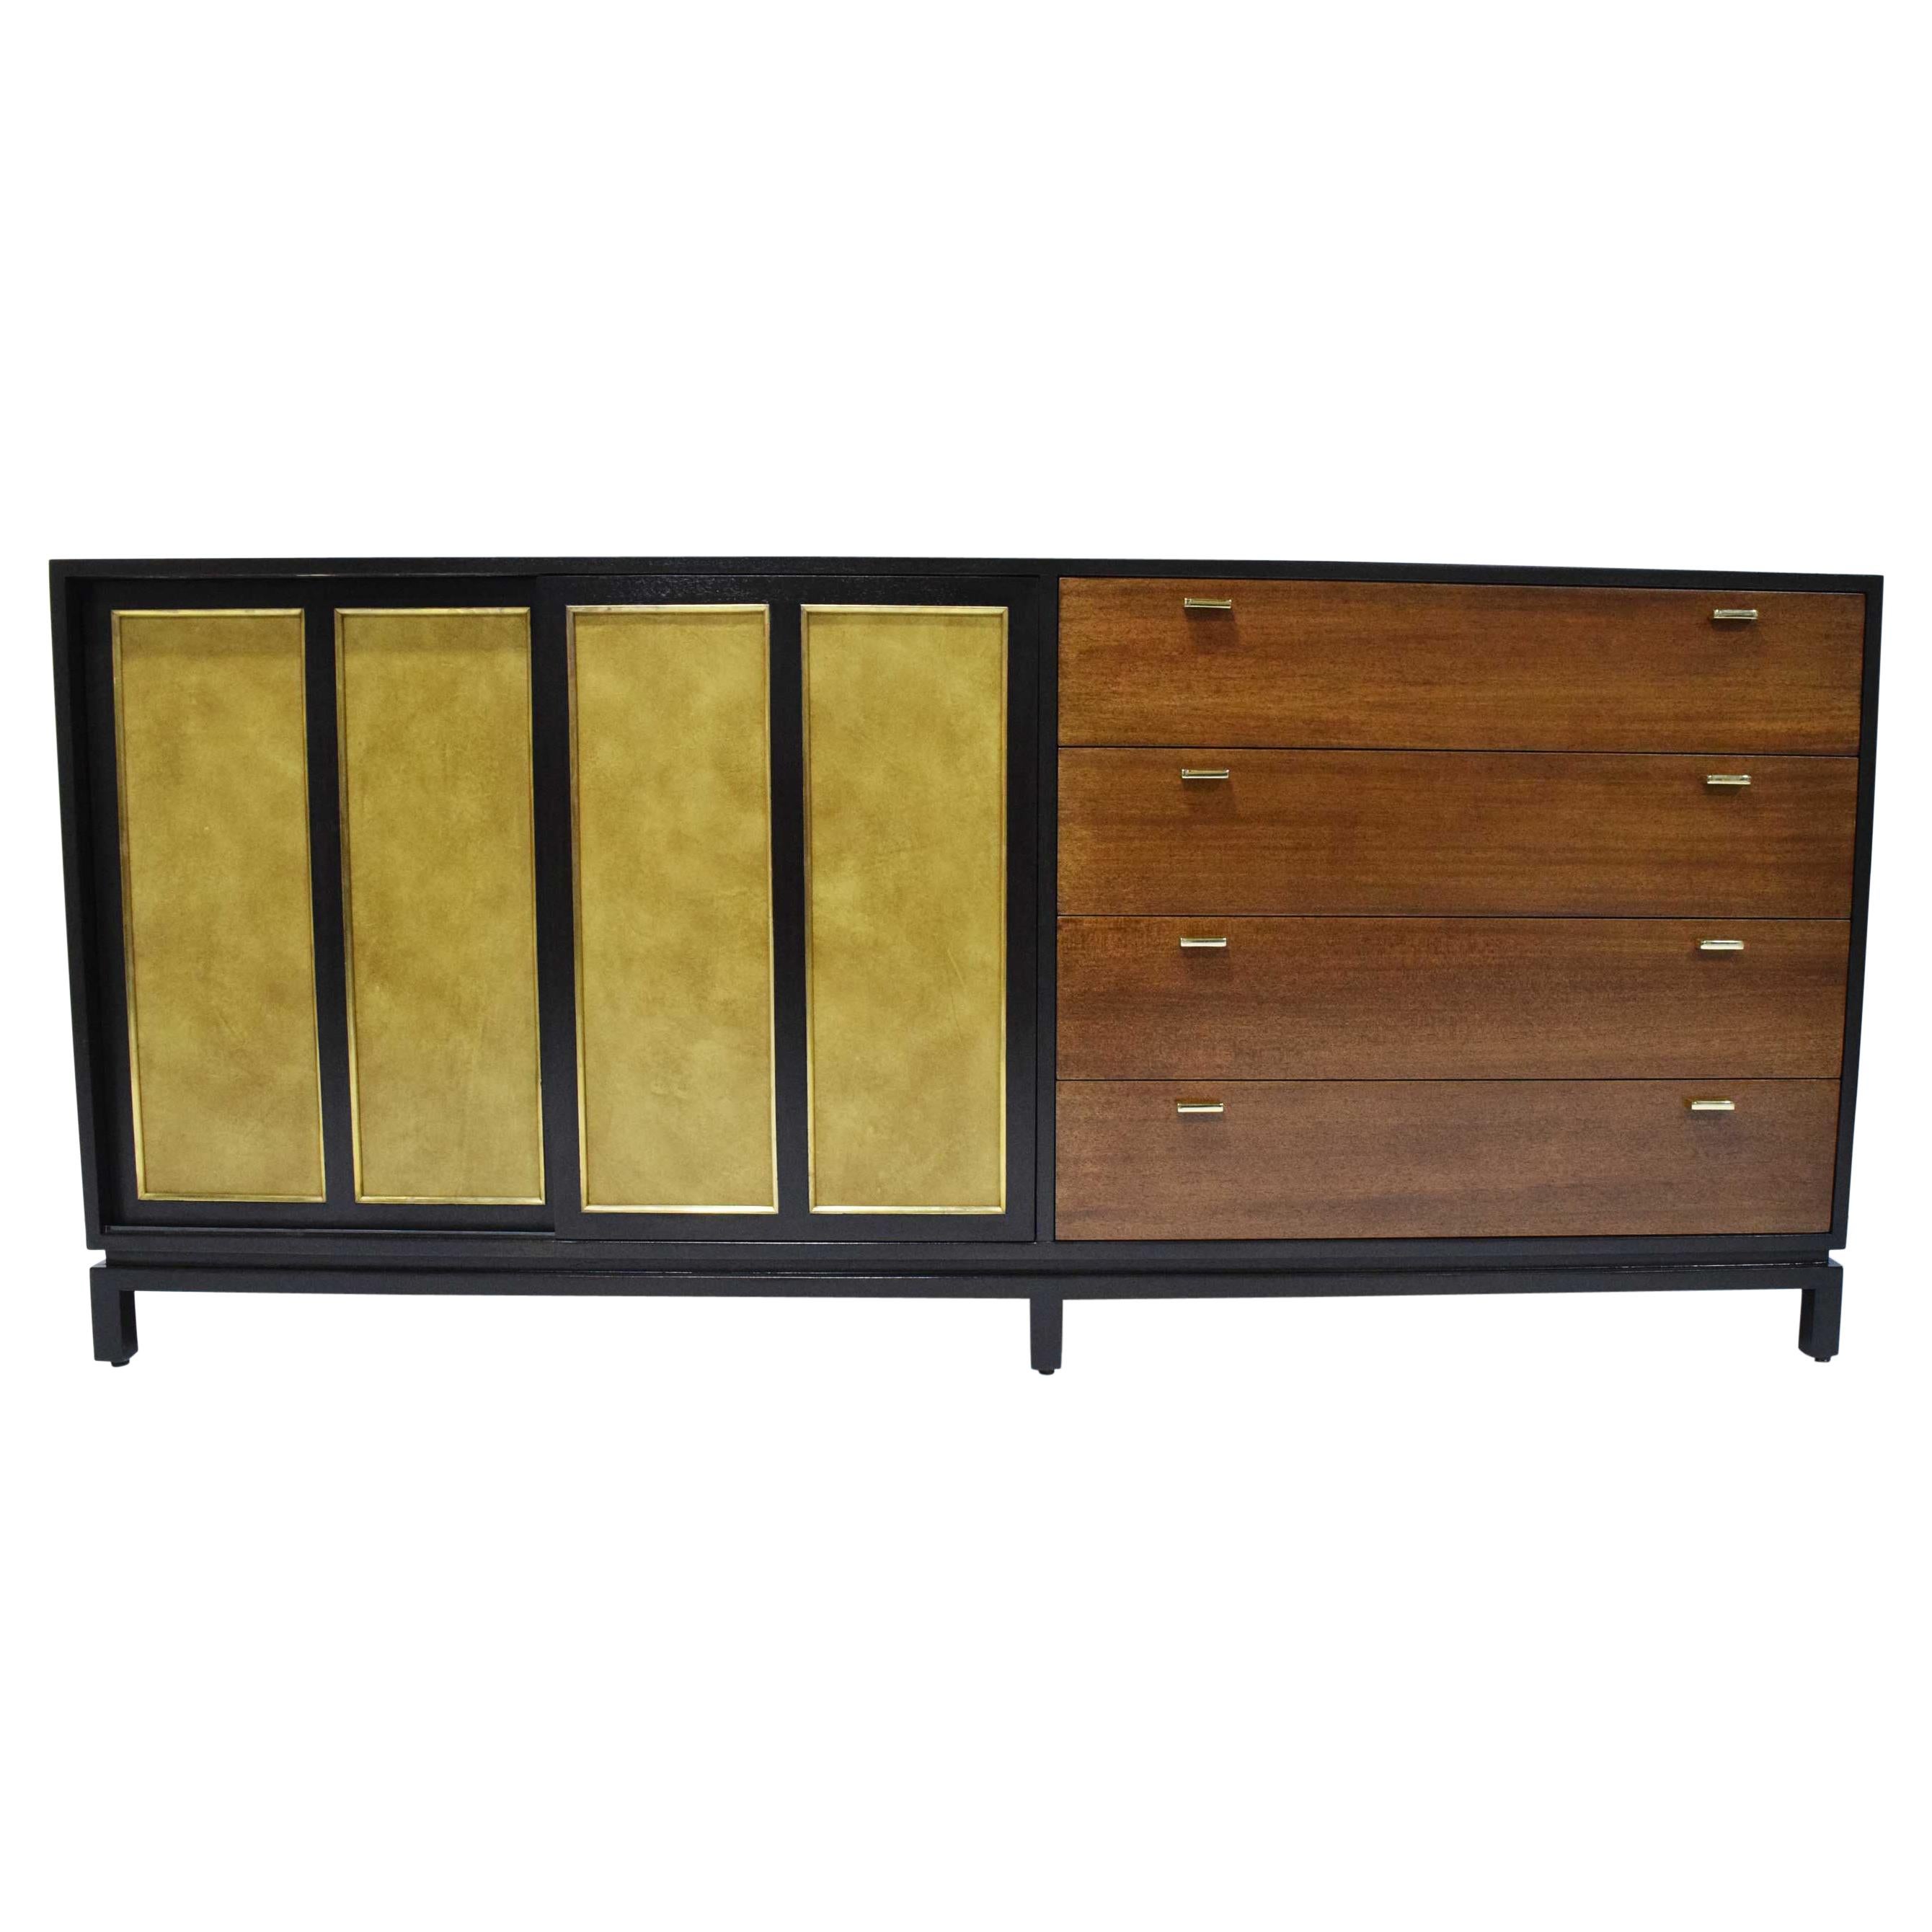 Harvey Probber Signed Sideboard in Mahogany with Gold Trim, 1960s